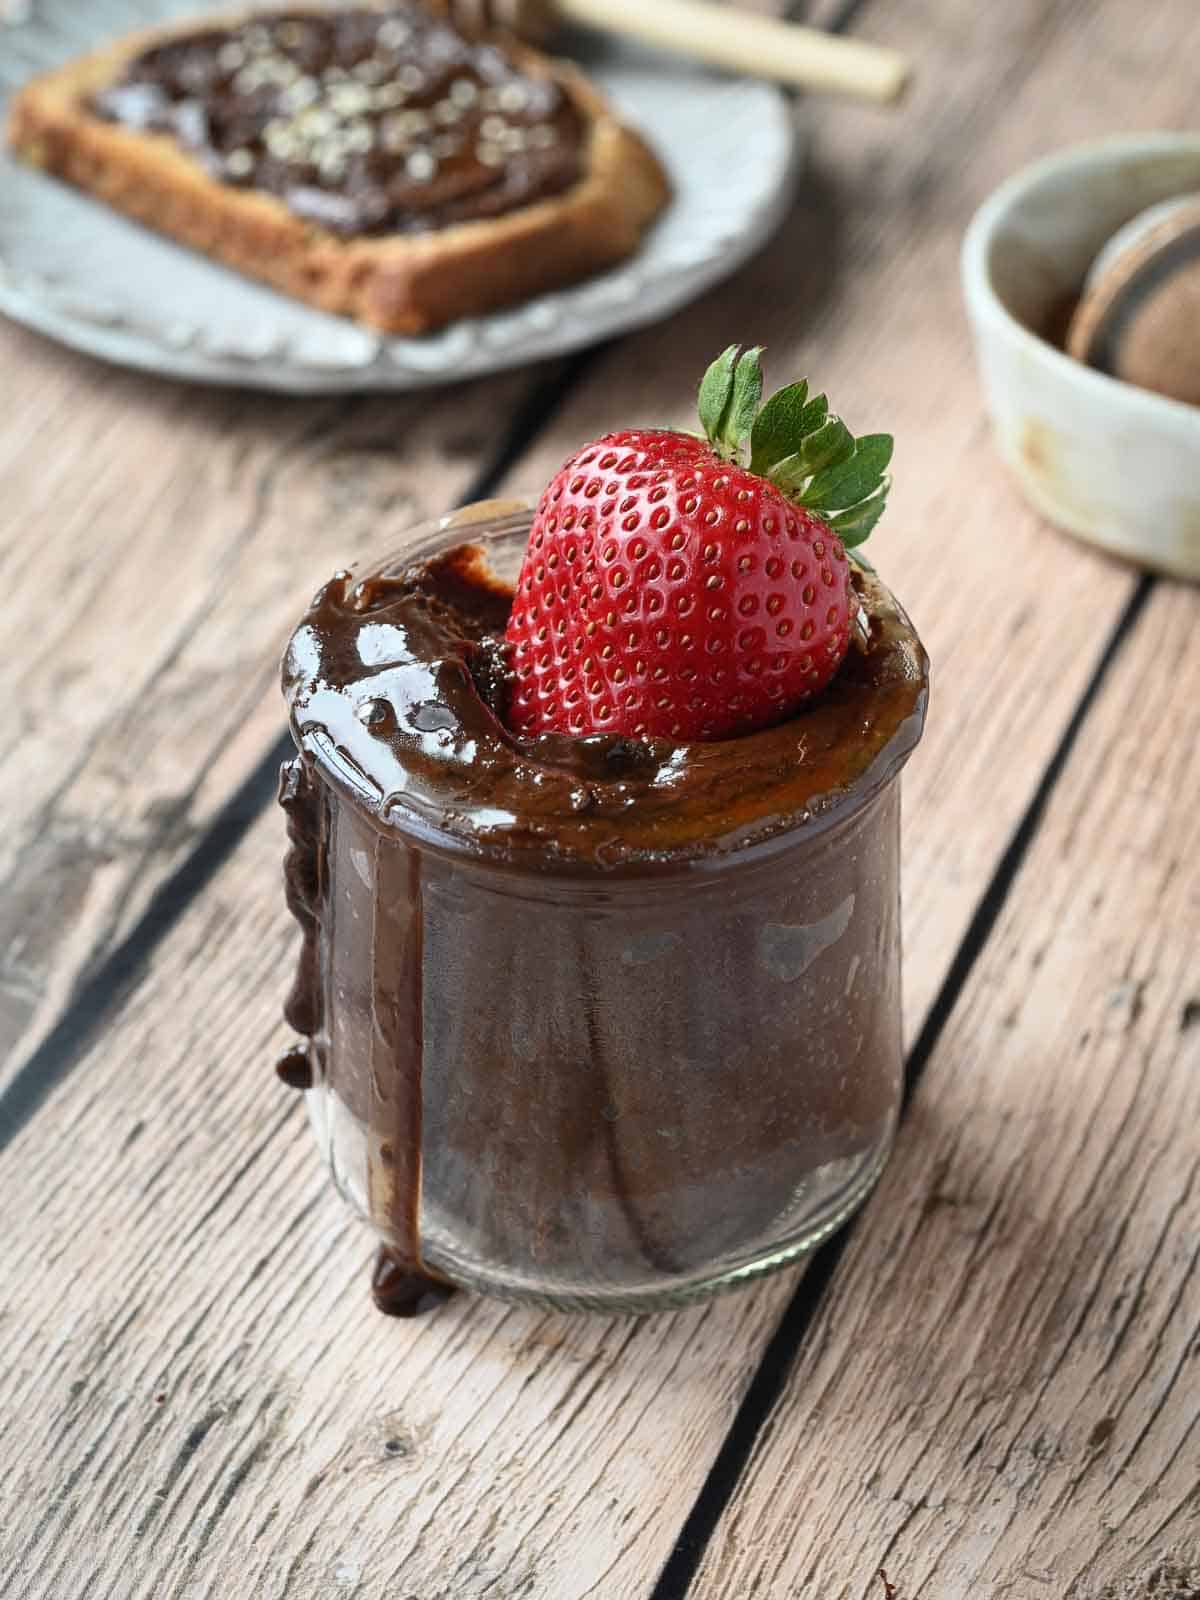 A strawberry dipped into a jar of chocolate tahini spread on wood.